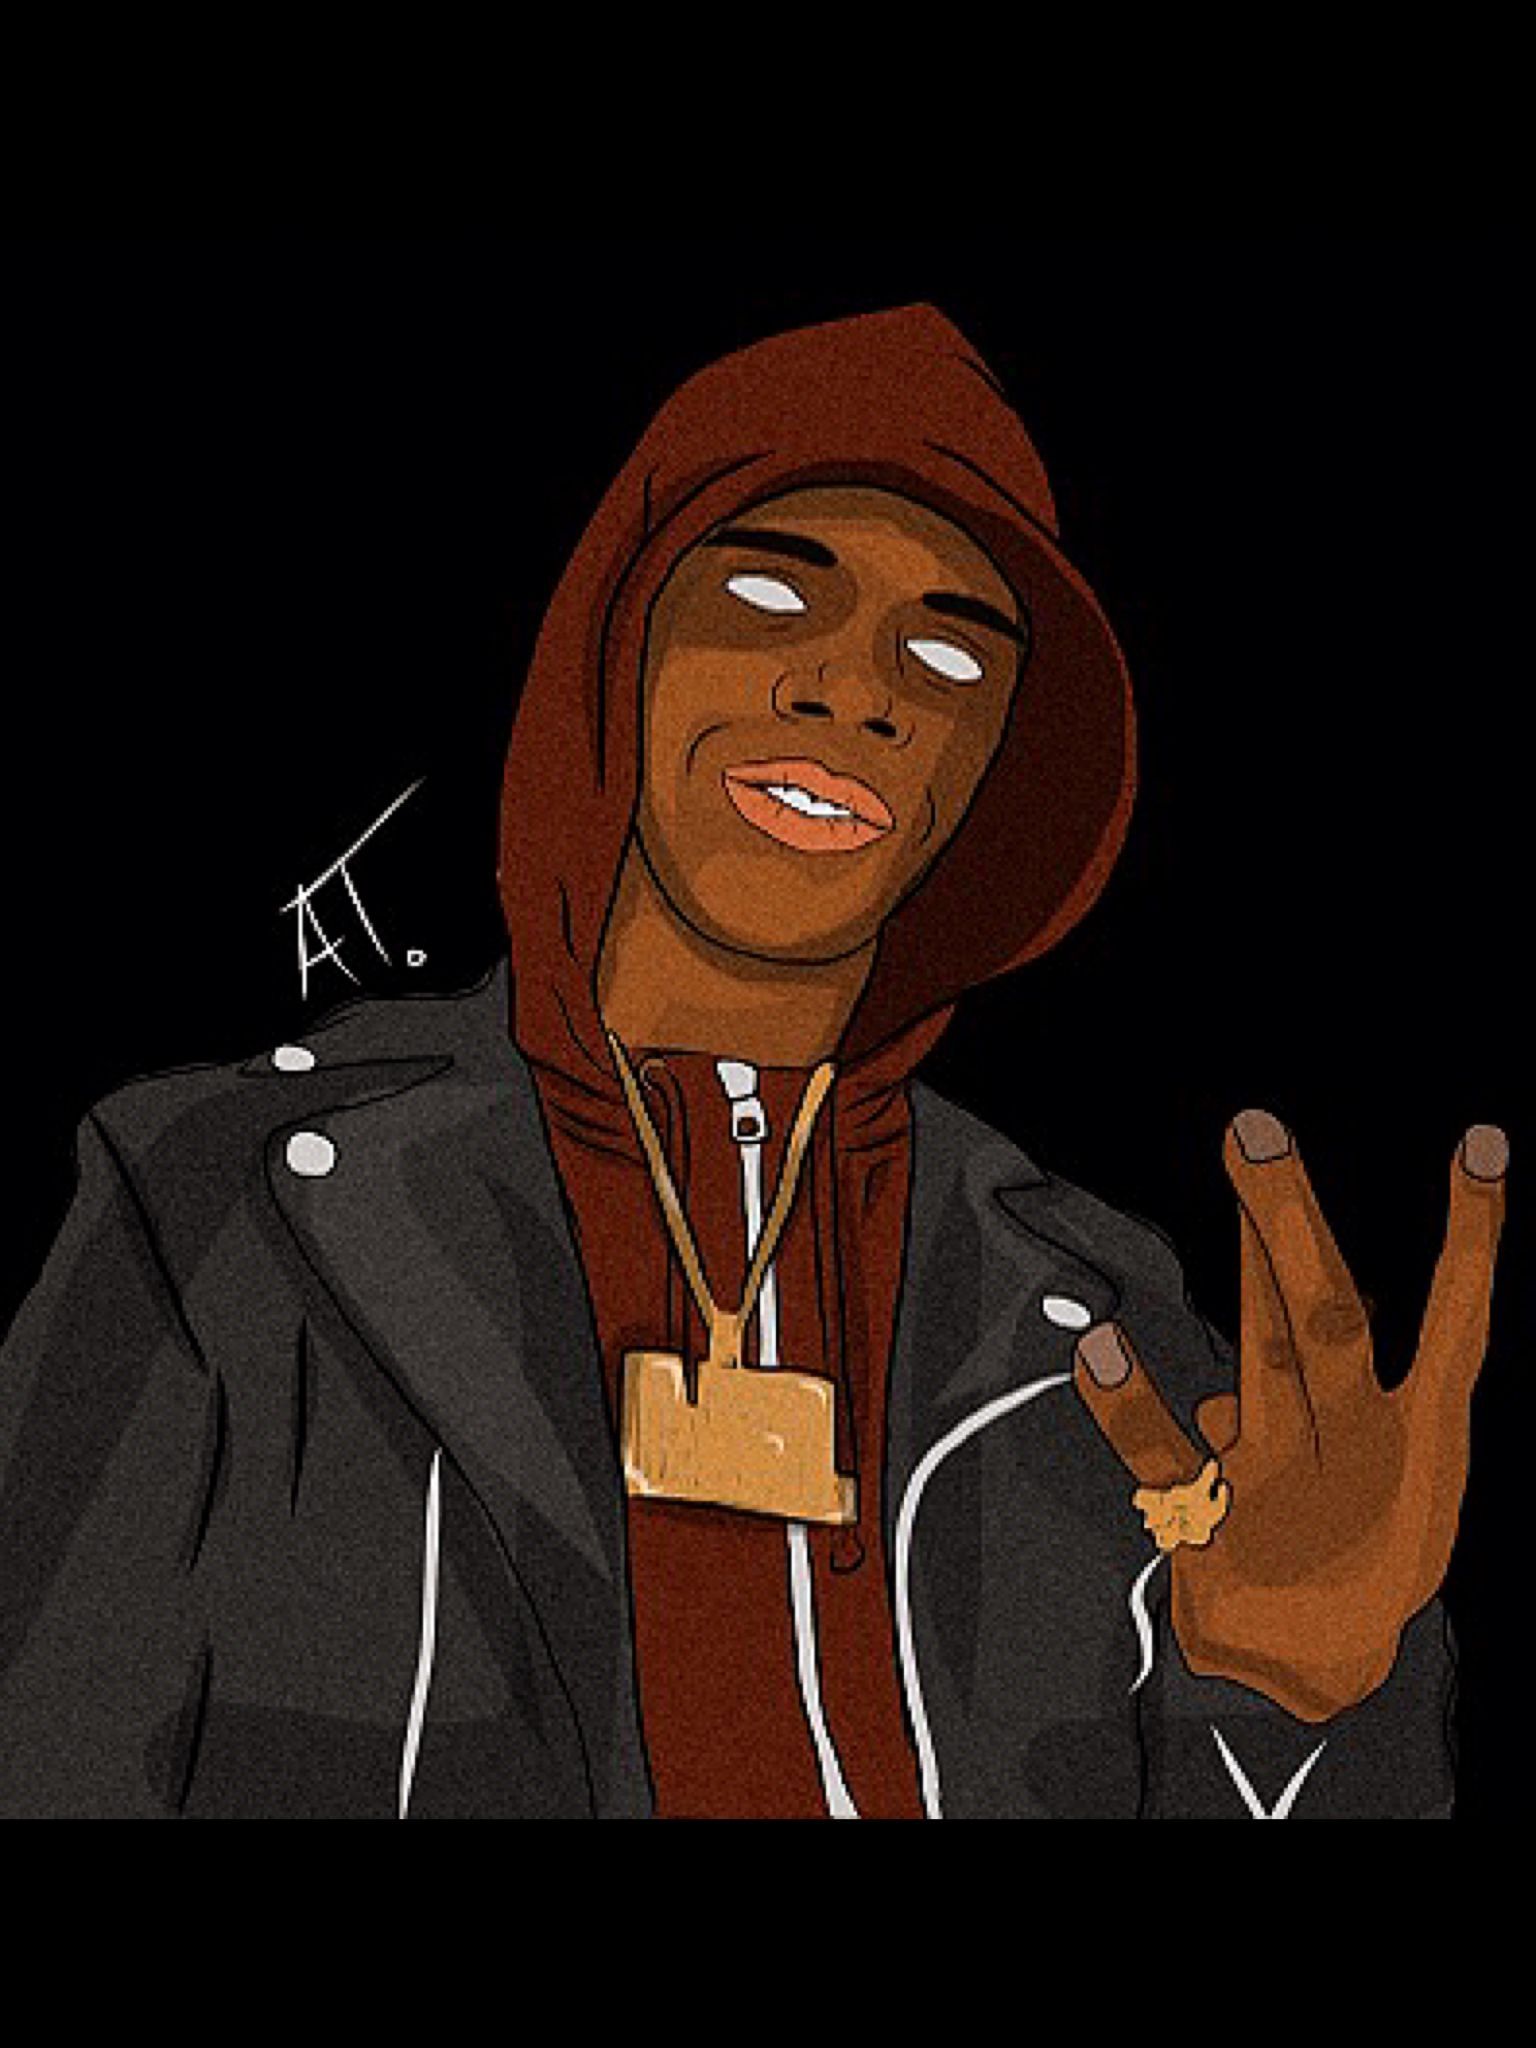 Free download A boogie wit da hoodie cartoon I made Melodies in 2019 Boogie [2048x2048] for your Desktop, Mobile & Tablet. Explore PnB Rock 2019 Wallpaper. PnB Rock 2019 Wallpaper, Rock Wallpaper, Rock Wallpaper